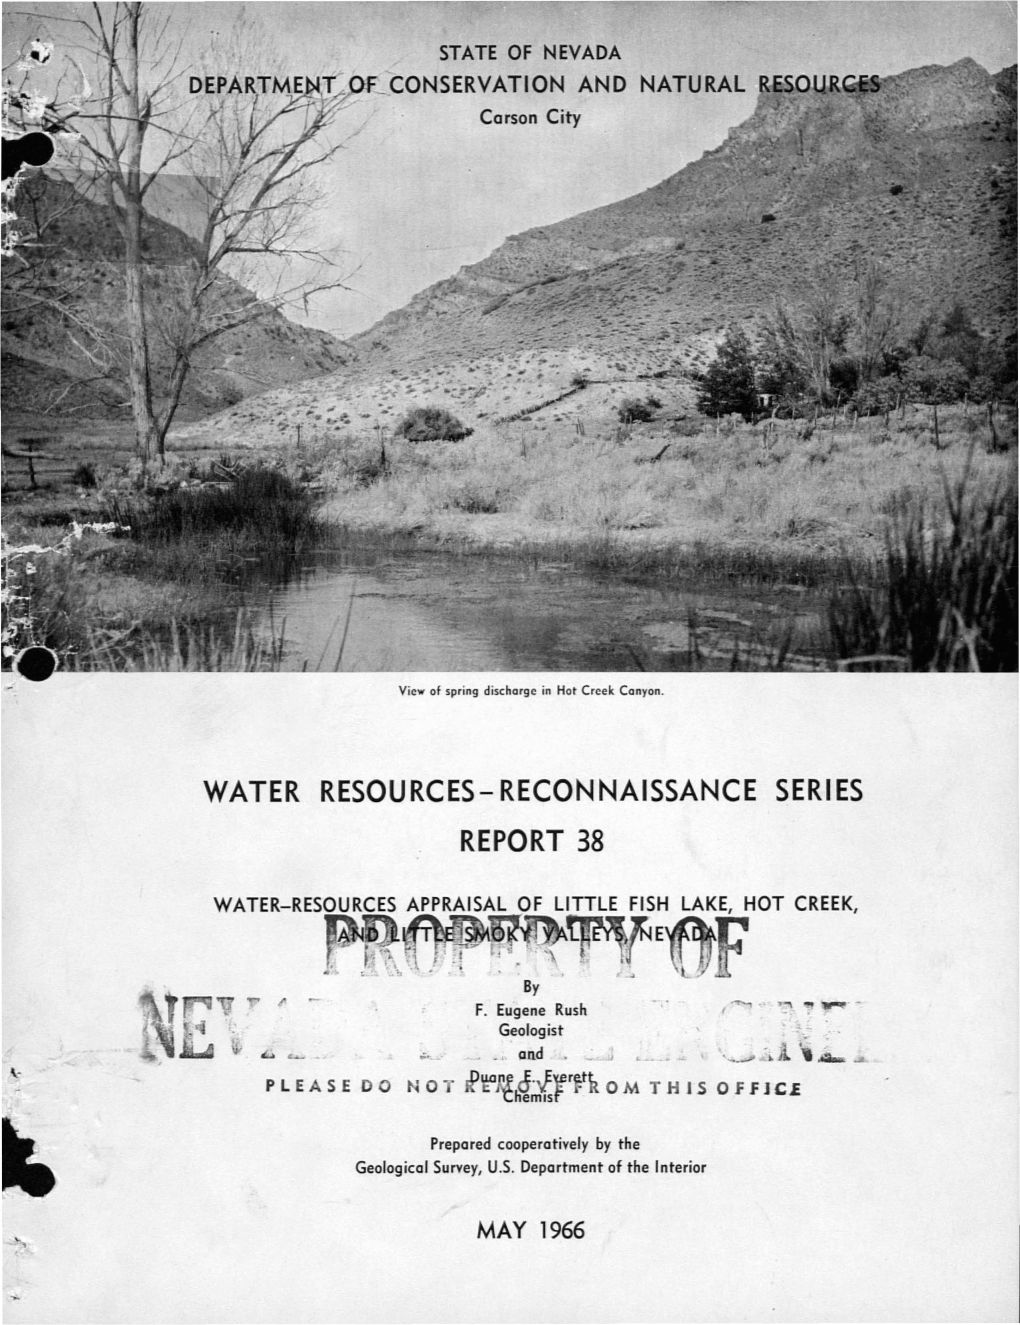 Water Resources Appraisal of Little Fish Lake, Hot Creek, and Little Smoky Valleys, Nevada. Report 38